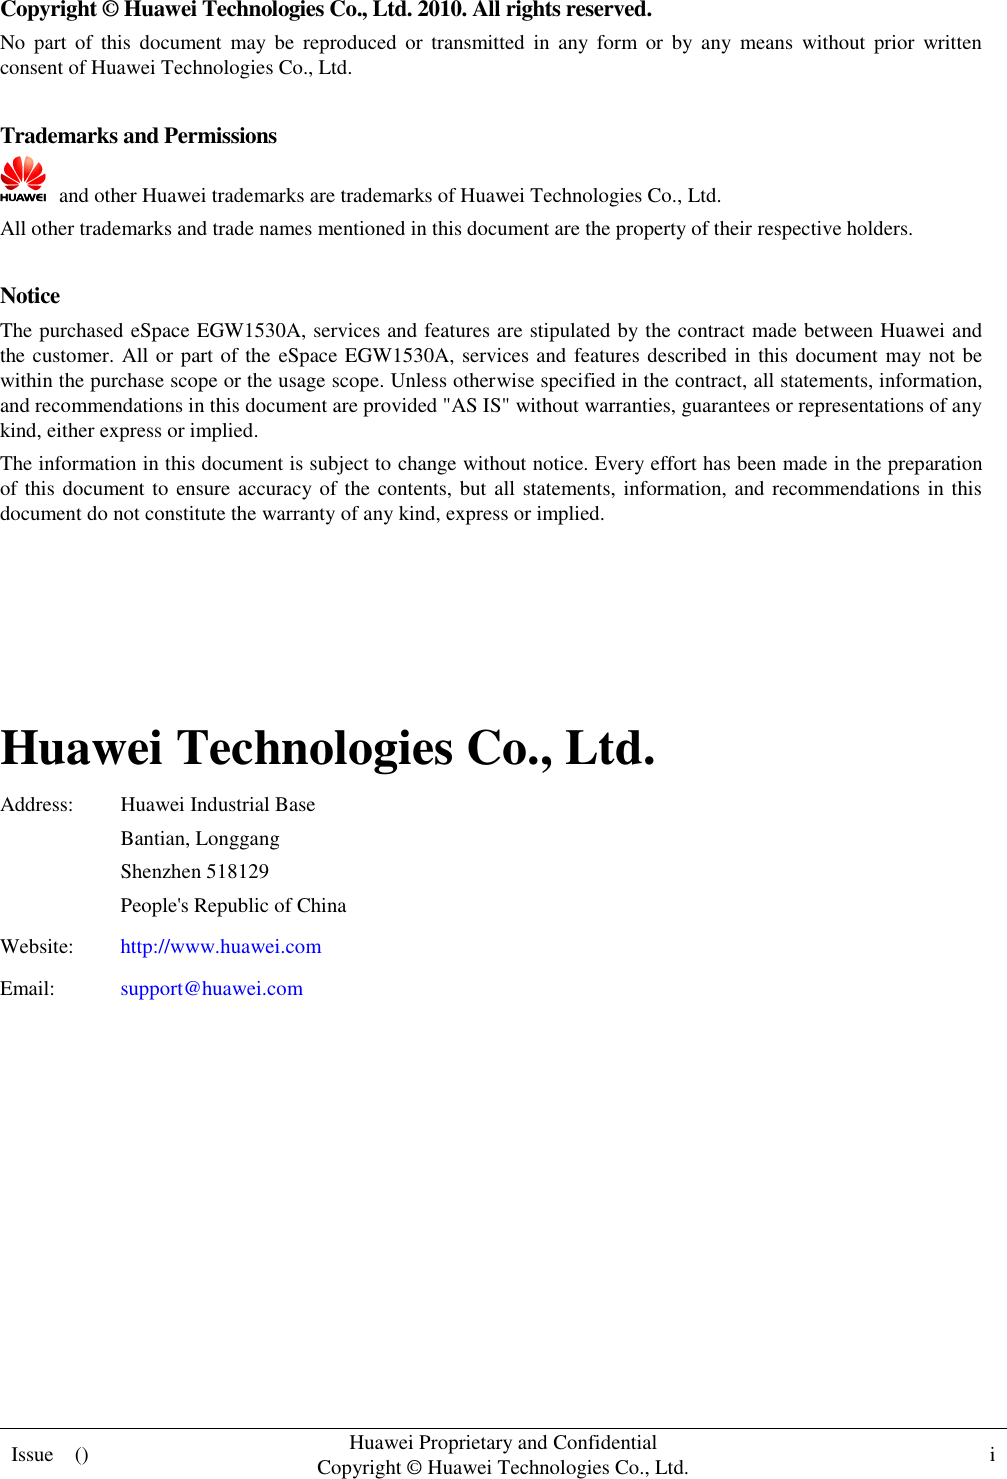  Issue    () Huawei Proprietary and Confidential                                     Copyright © Huawei Technologies Co., Ltd. i    Copyright © Huawei Technologies Co., Ltd. 2010. All rights reserved. No  part  of  this  document  may  be  reproduced  or  transmitted  in  any  form  or  by  any  means  without  prior  written consent of Huawei Technologies Co., Ltd.  Trademarks and Permissions   and other Huawei trademarks are trademarks of Huawei Technologies Co., Ltd. All other trademarks and trade names mentioned in this document are the property of their respective holders.  Notice The purchased eSpace EGW1530A, services and features are stipulated by the contract made between Huawei and the customer. All or part of the eSpace EGW1530A, services and features described in this document may not be within the purchase scope or the usage scope. Unless otherwise specified in the contract, all statements, information, and recommendations in this document are provided &quot;AS IS&quot; without warranties, guarantees or representations of any kind, either express or implied. The information in this document is subject to change without notice. Every effort has been made in the preparation of this document to ensure accuracy of the contents, but all statements, information, and recommendations in this document do not constitute the warranty of any kind, express or implied.     Huawei Technologies Co., Ltd. Address: Huawei Industrial Base Bantian, Longgang Shenzhen 518129 People&apos;s Republic of China Website: http://www.huawei.com Email: support@huawei.com          